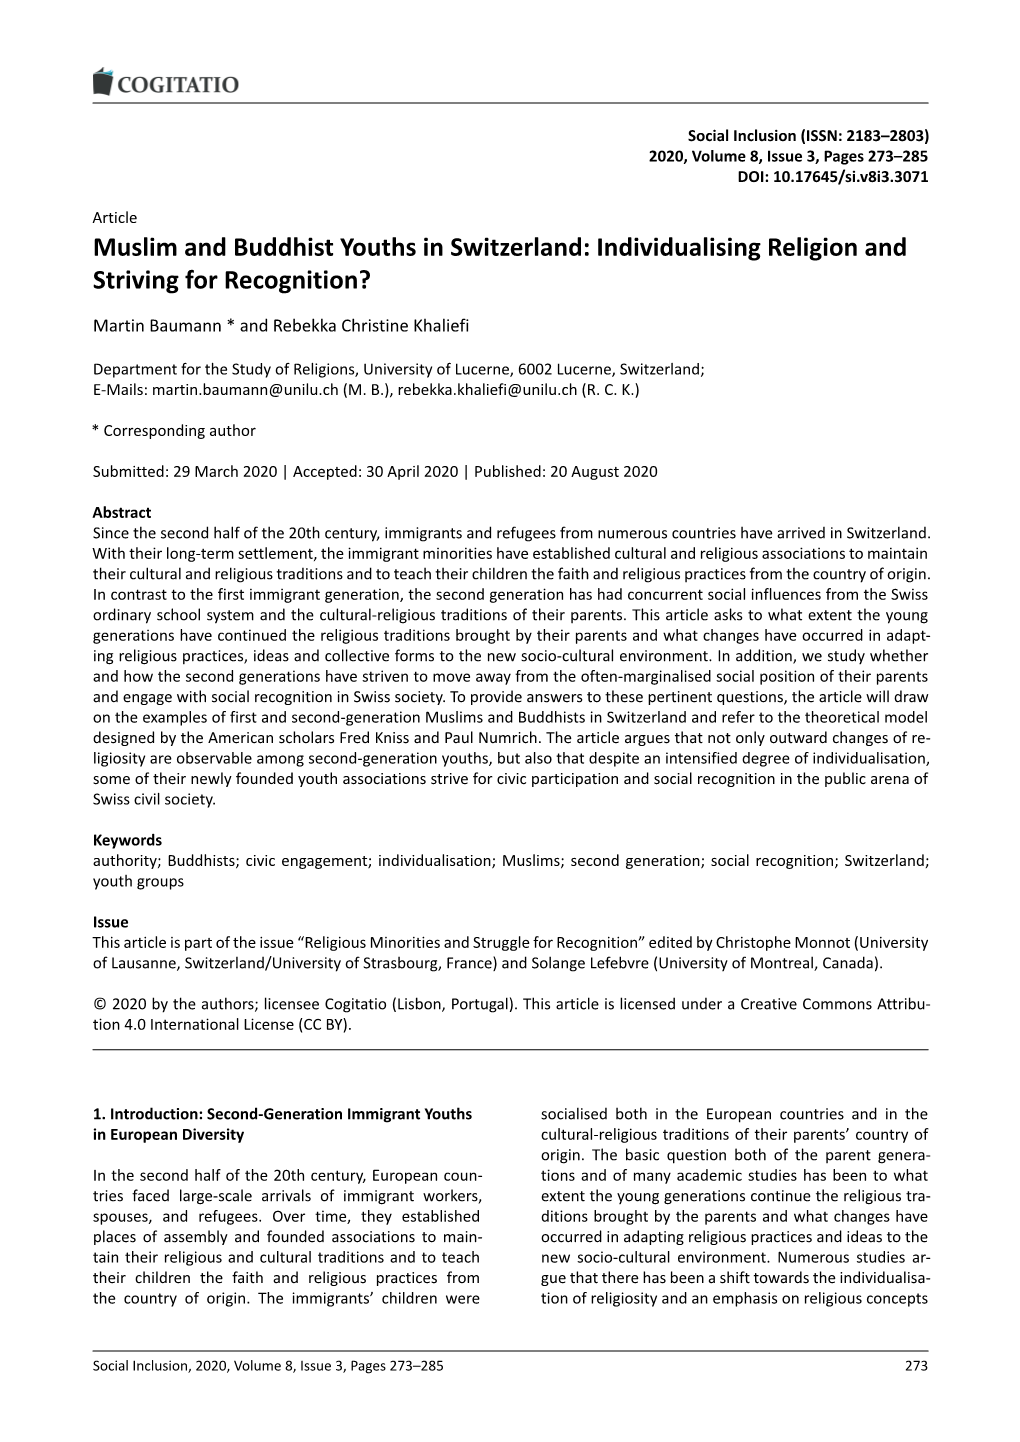 Muslim and Buddhist Youths in Switzerland: Individualising Religion and Striving for Recognition?